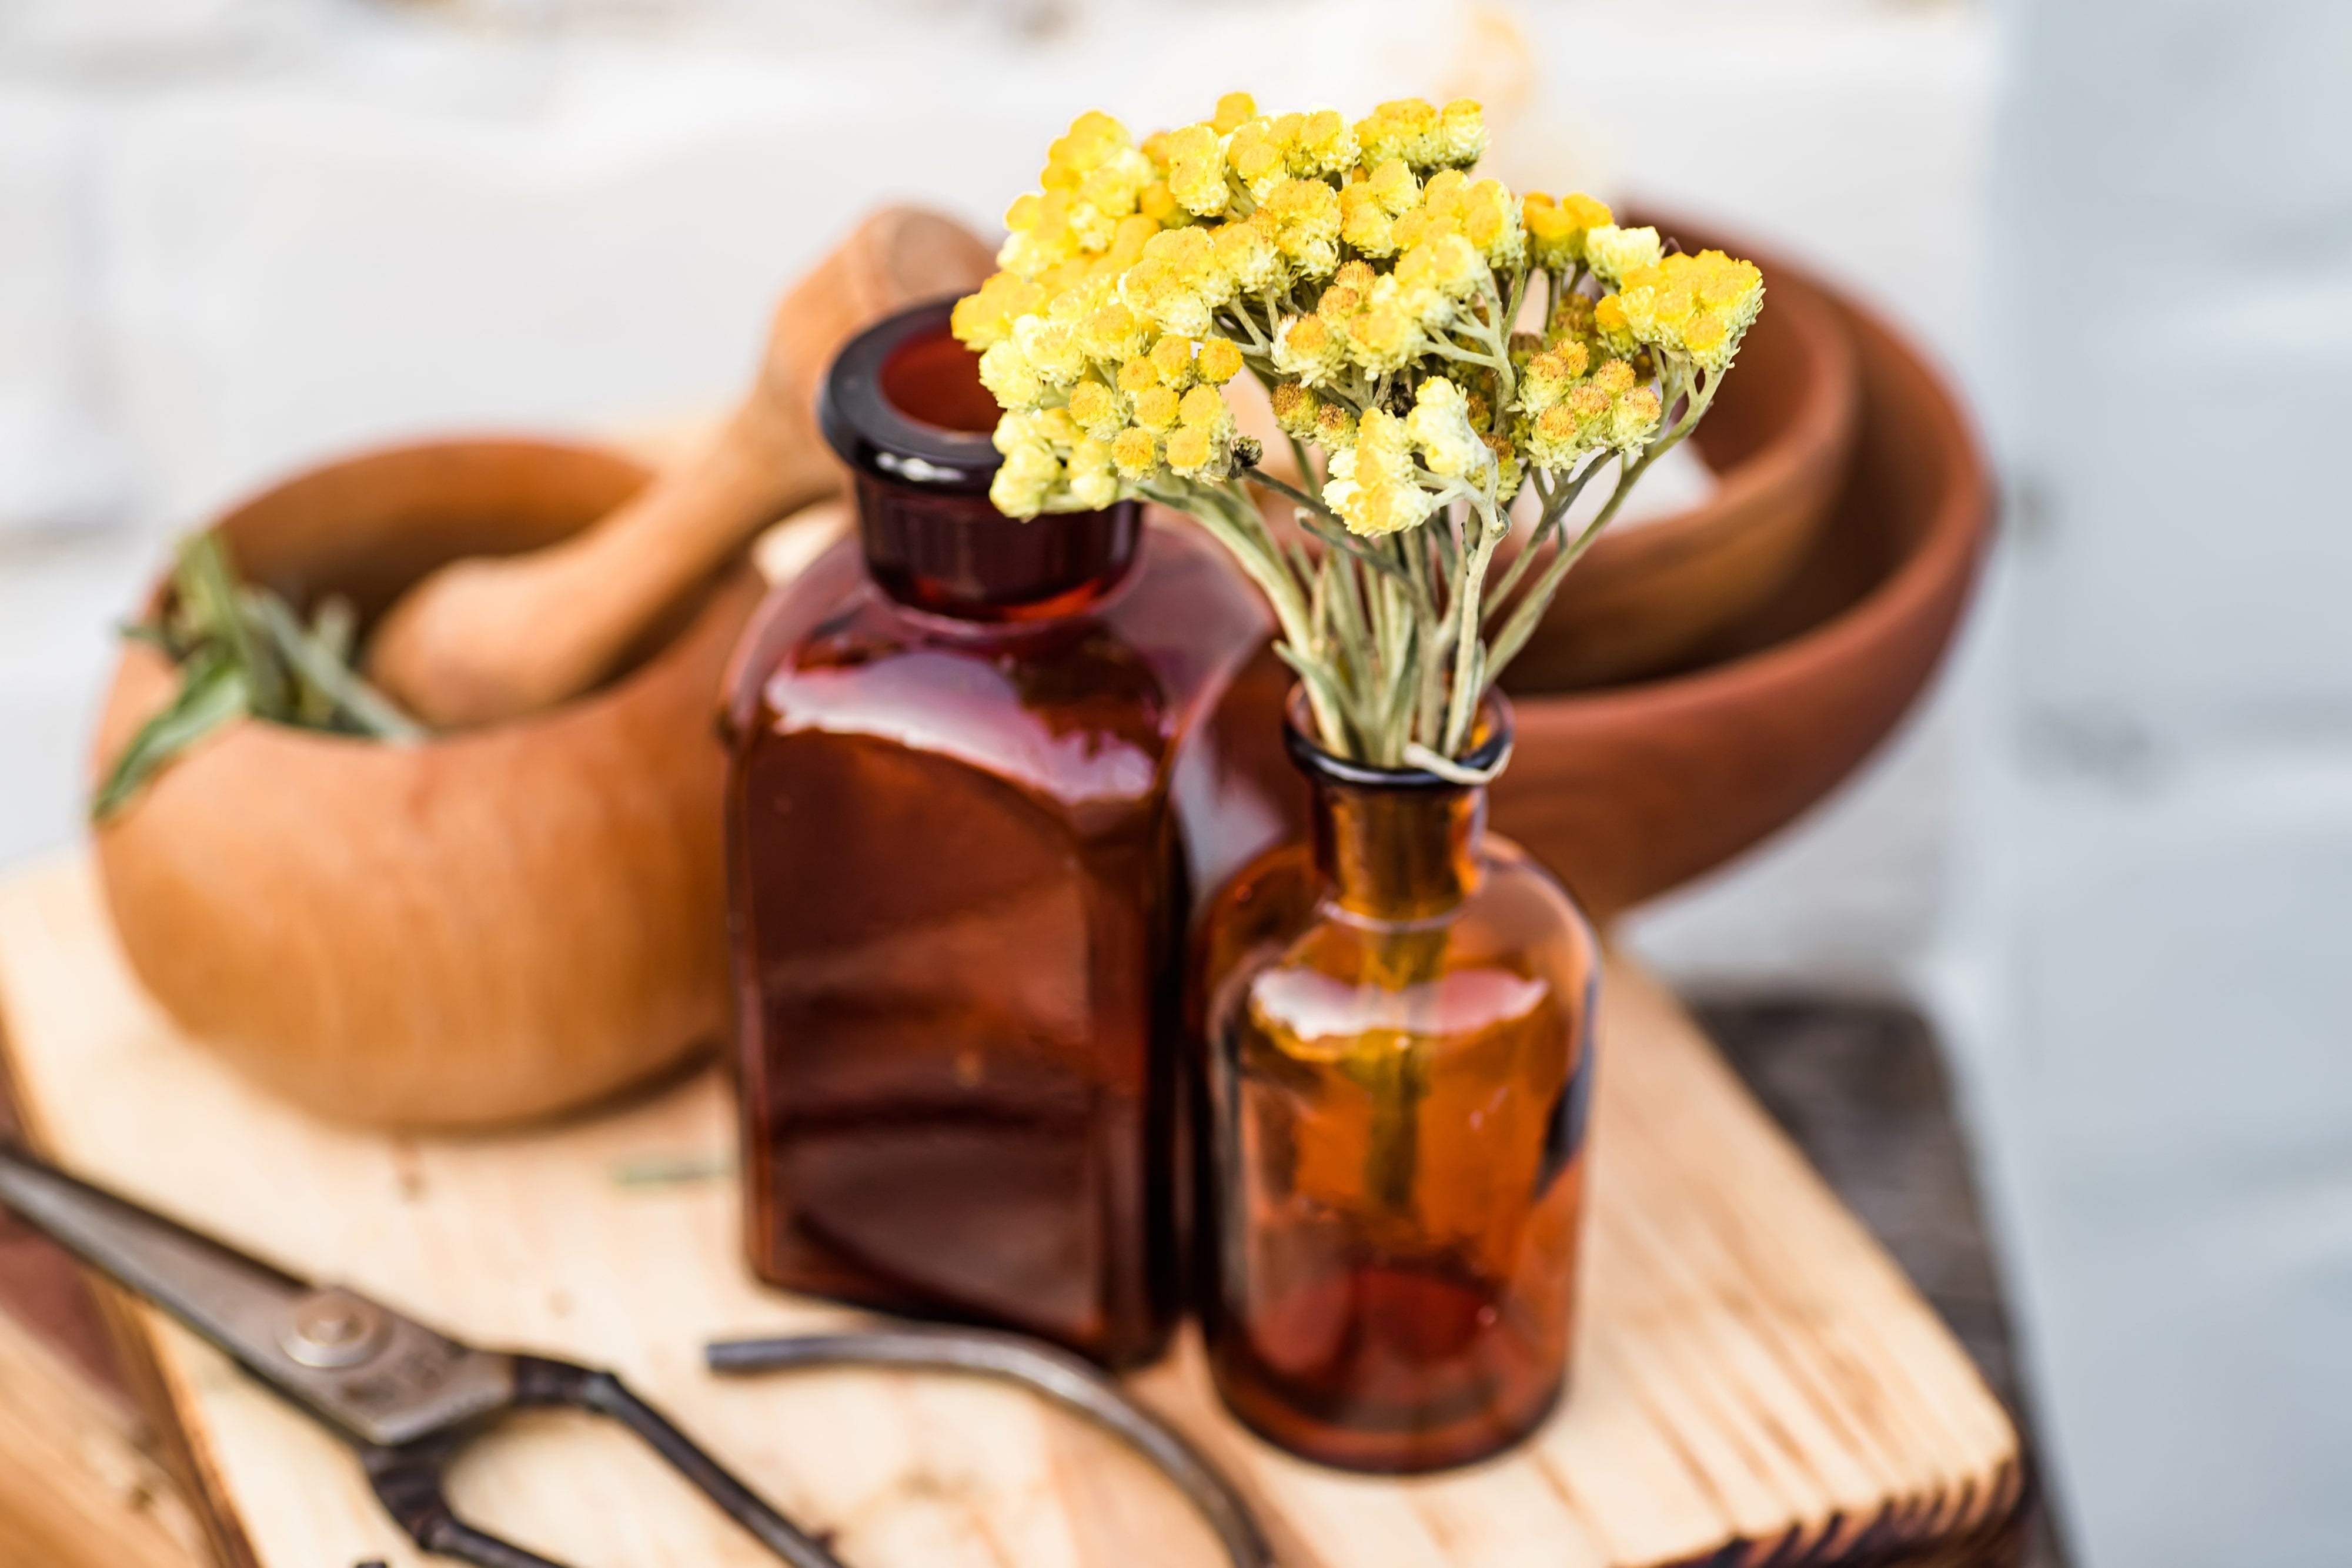 What Blends Well With Helichrysum Essential Oil?